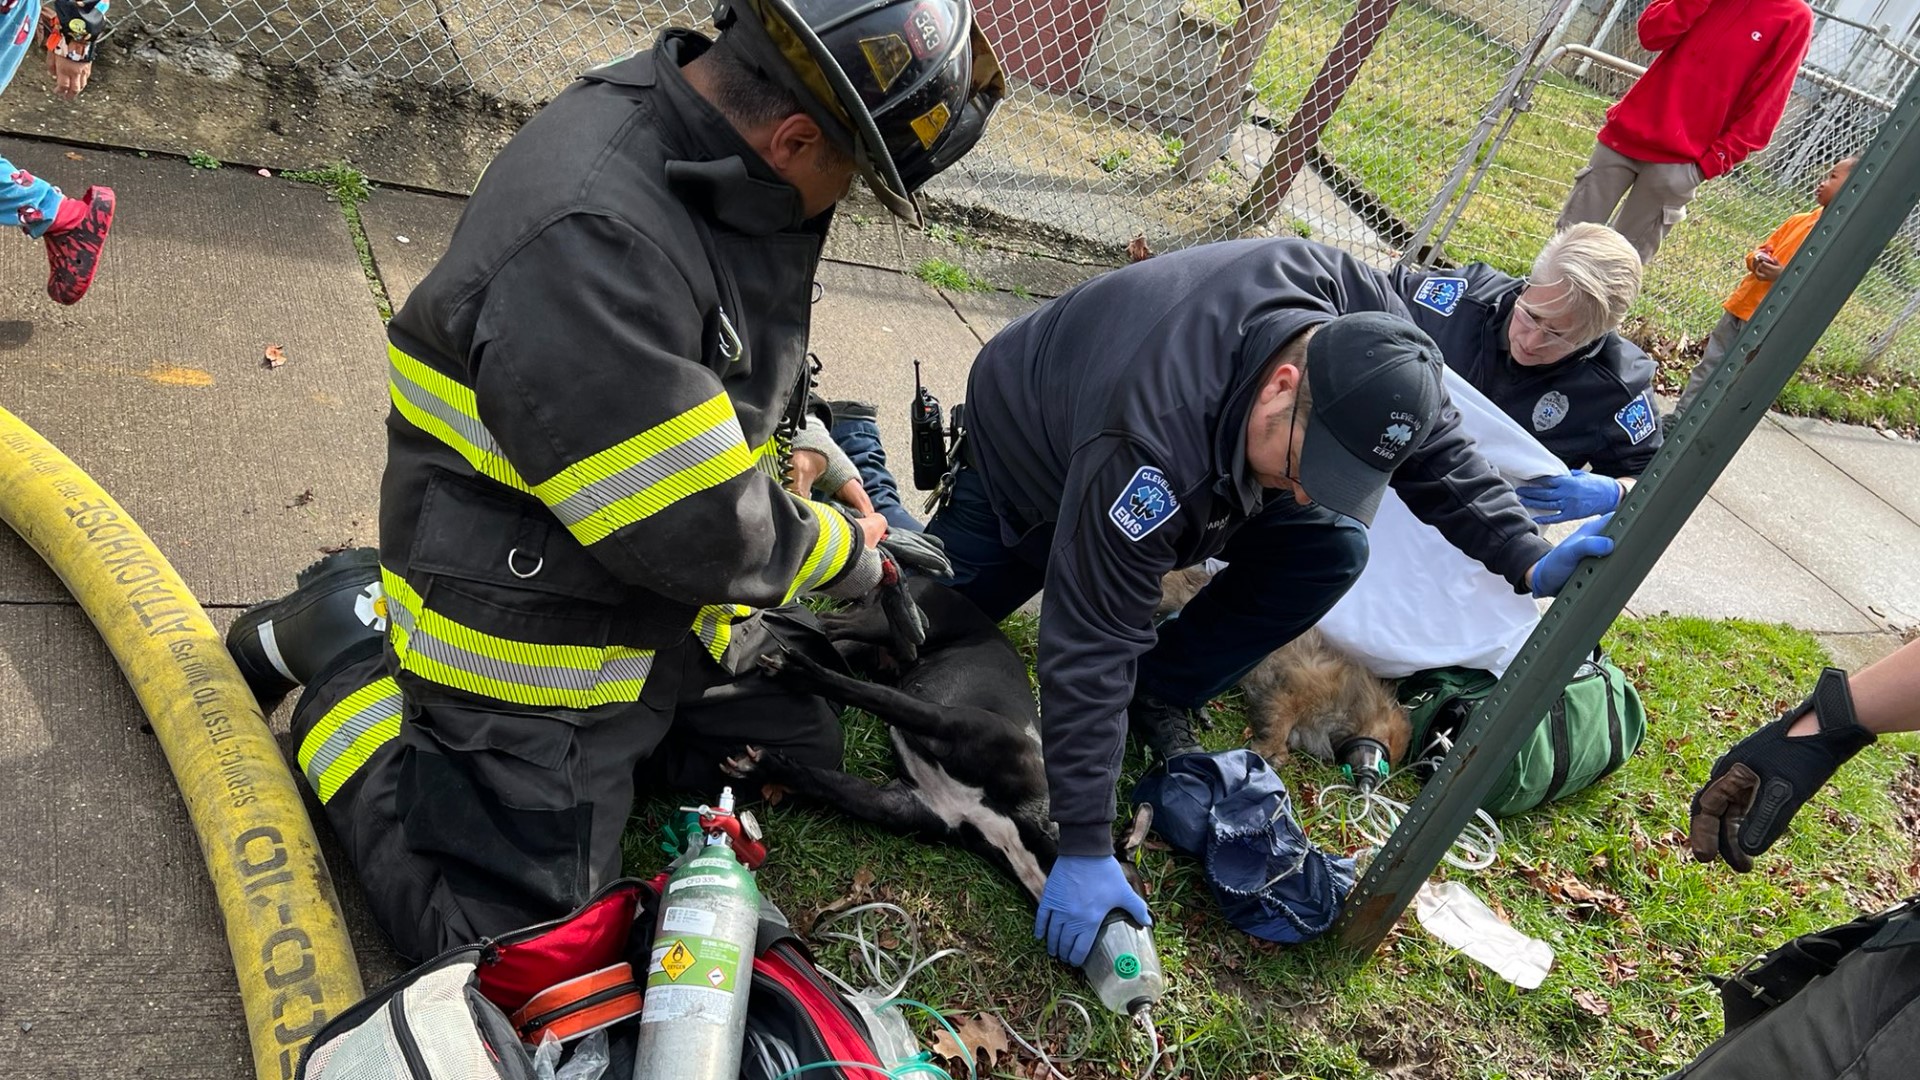 Cleveland firefighters revived a dog after a fire broke out in a home near the intersection of West 56th Street and Field Avenue on Thursday afternoon.